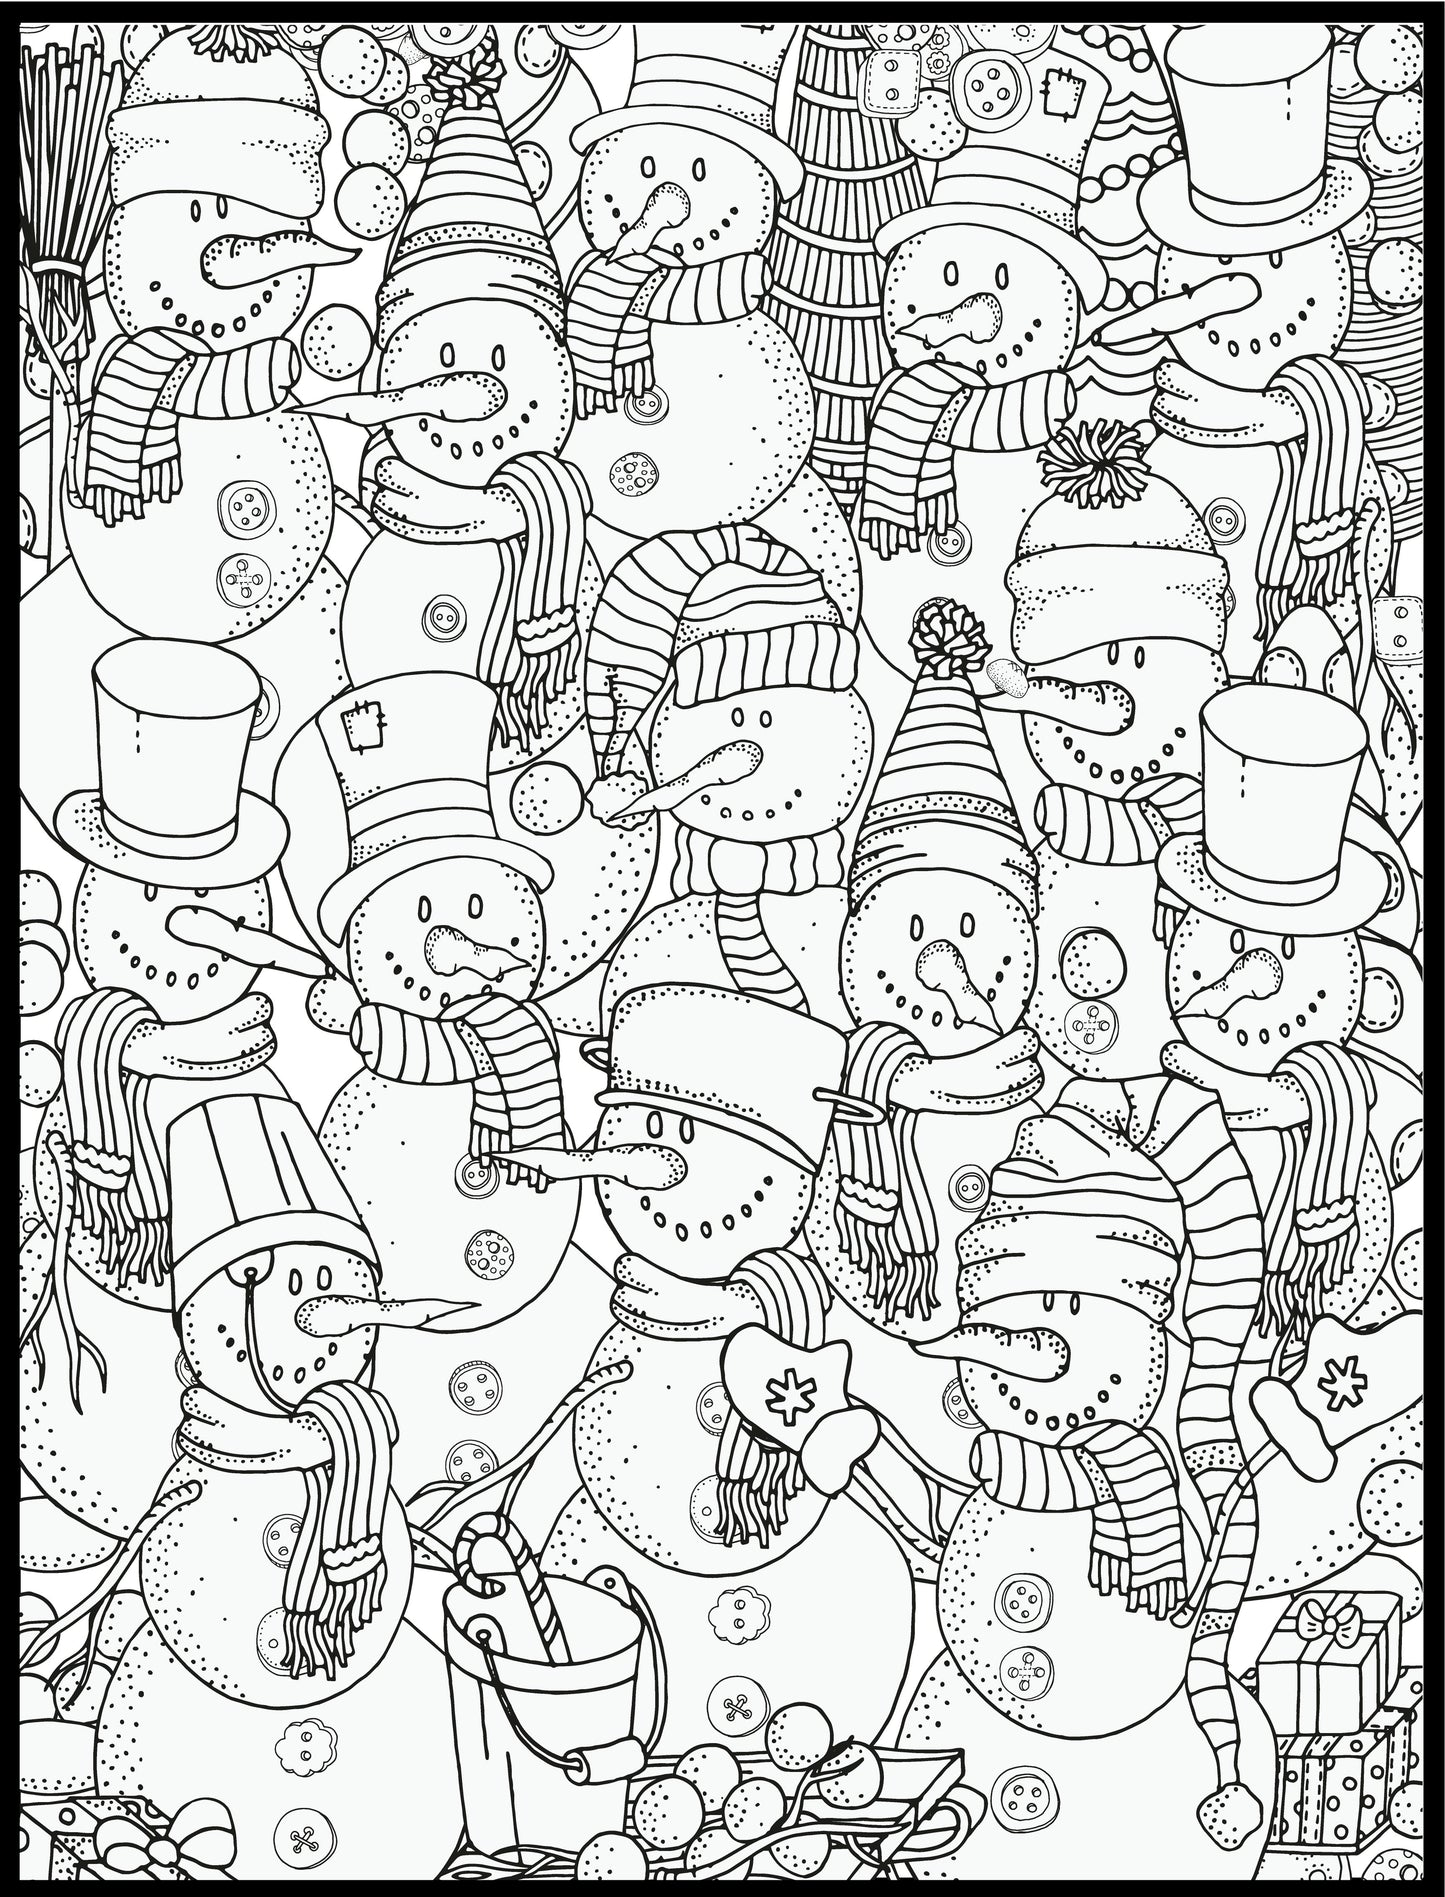 Snowman Party Personalized Giant Coloring Poster 46"x60"